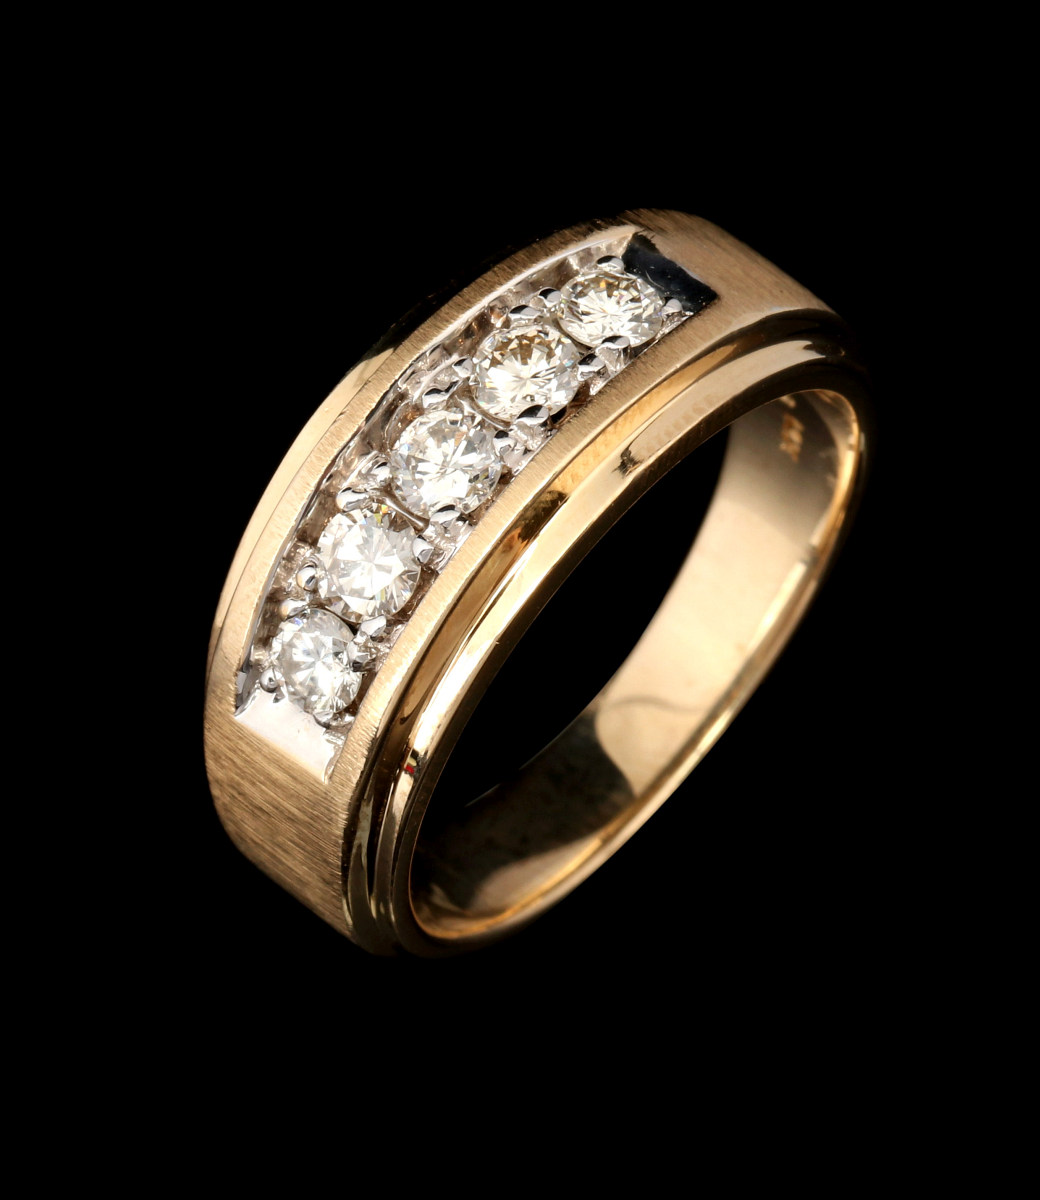 GENT'S 14K GOLD AND DIAMOND BAND APPROX 1.25 CT. T.W.